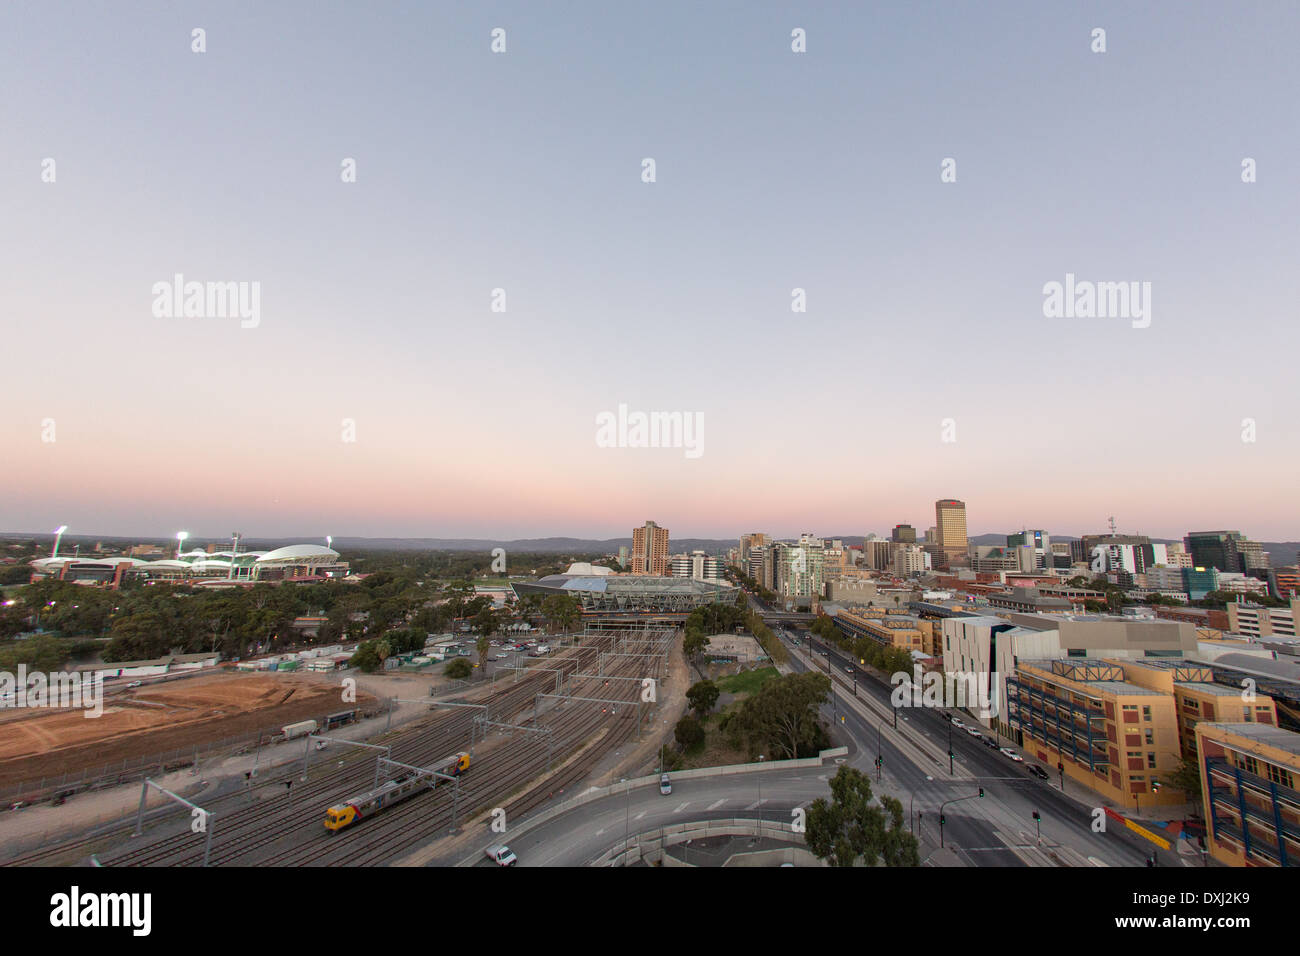 A view of Adelaide City from an elevated position Stock Photo